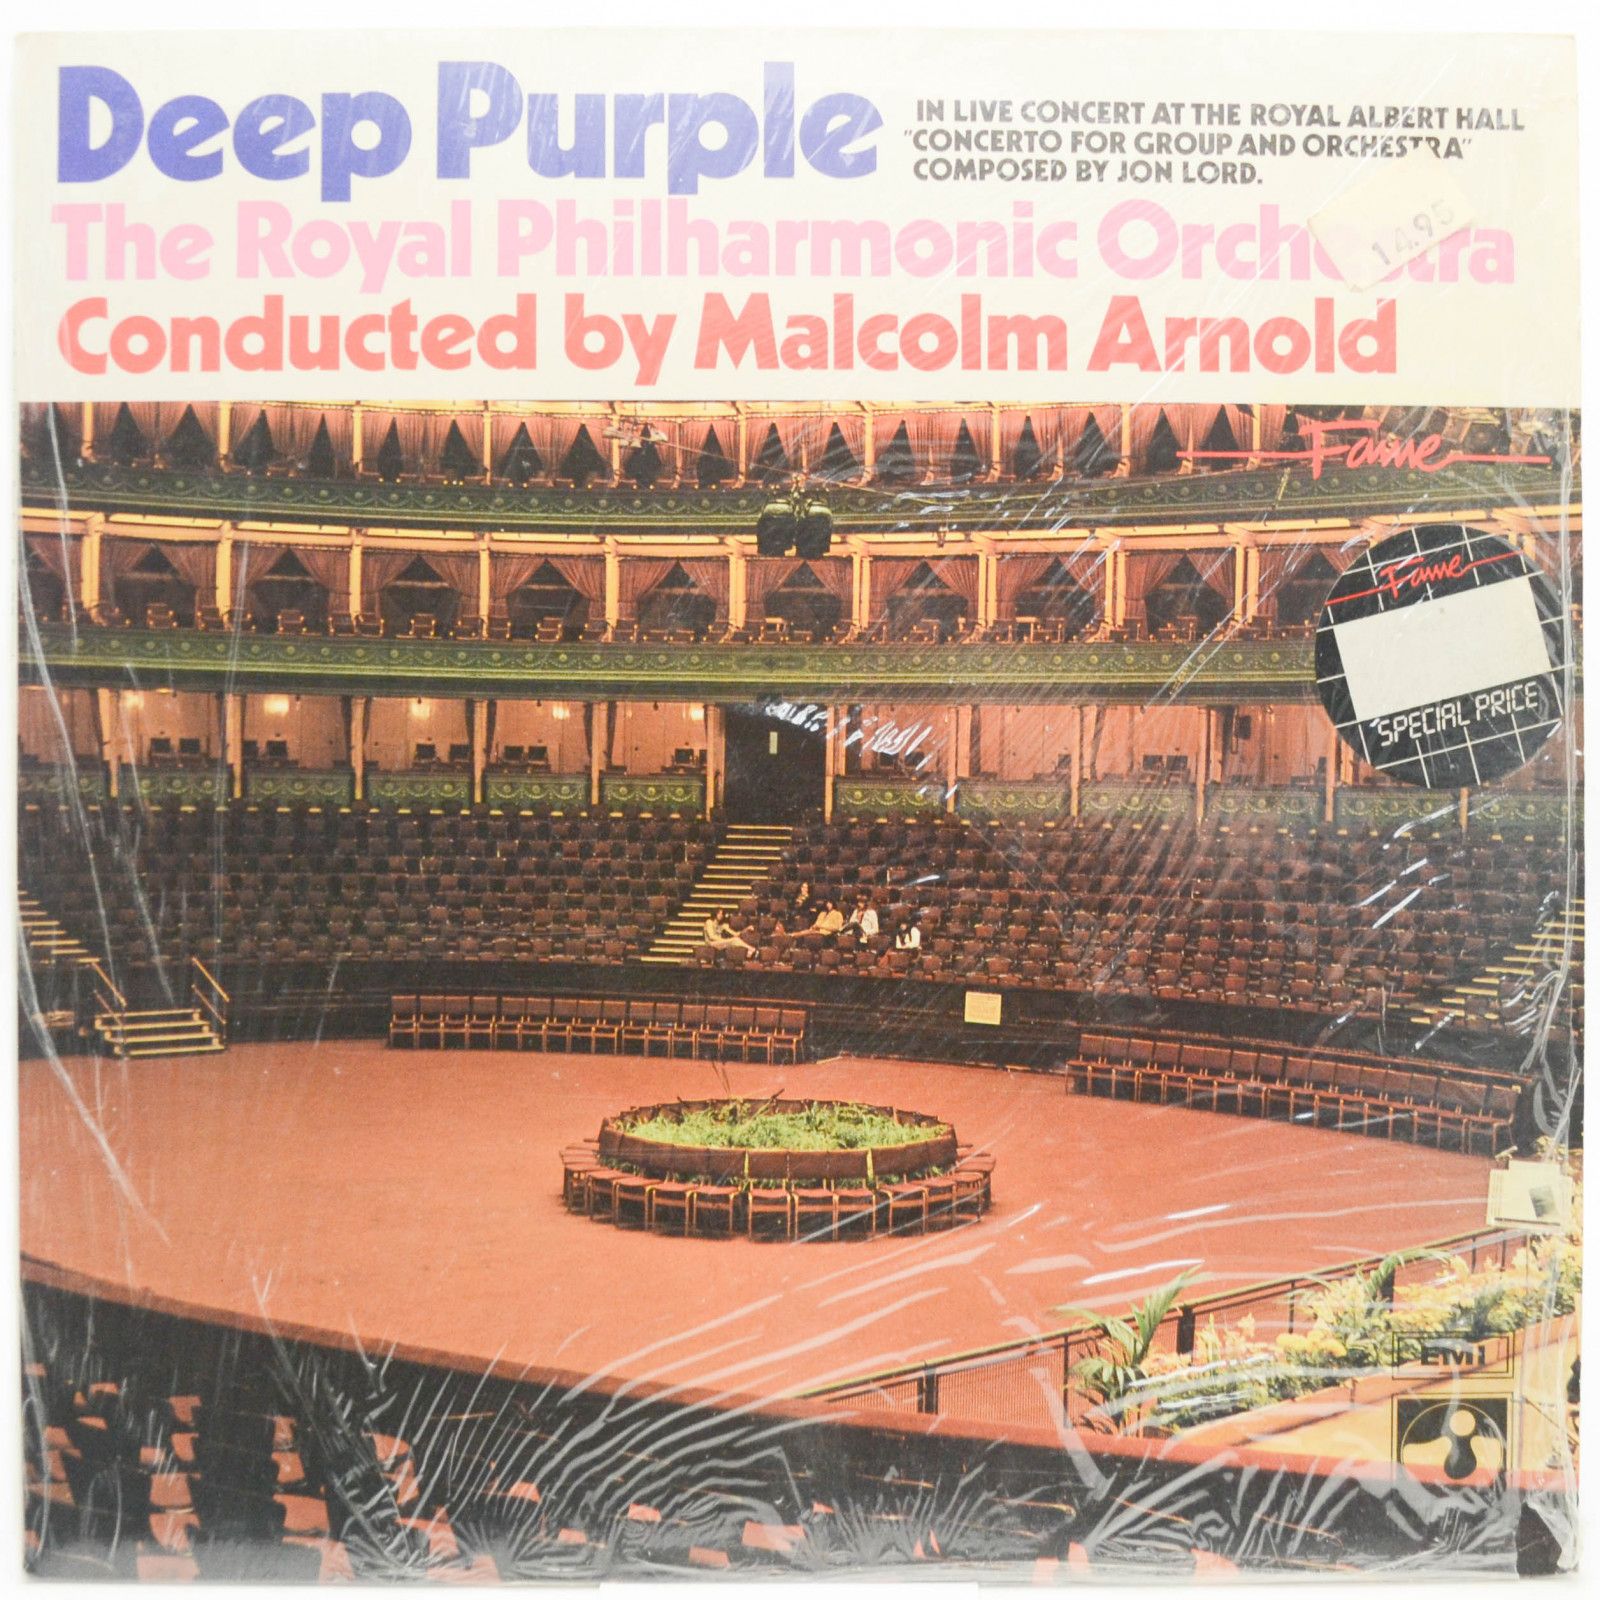 Deep Purple, The Royal Philharmonic Orchestra Conducted by Malcolm Arnold — Concerto For Group And Orchestra, 1969